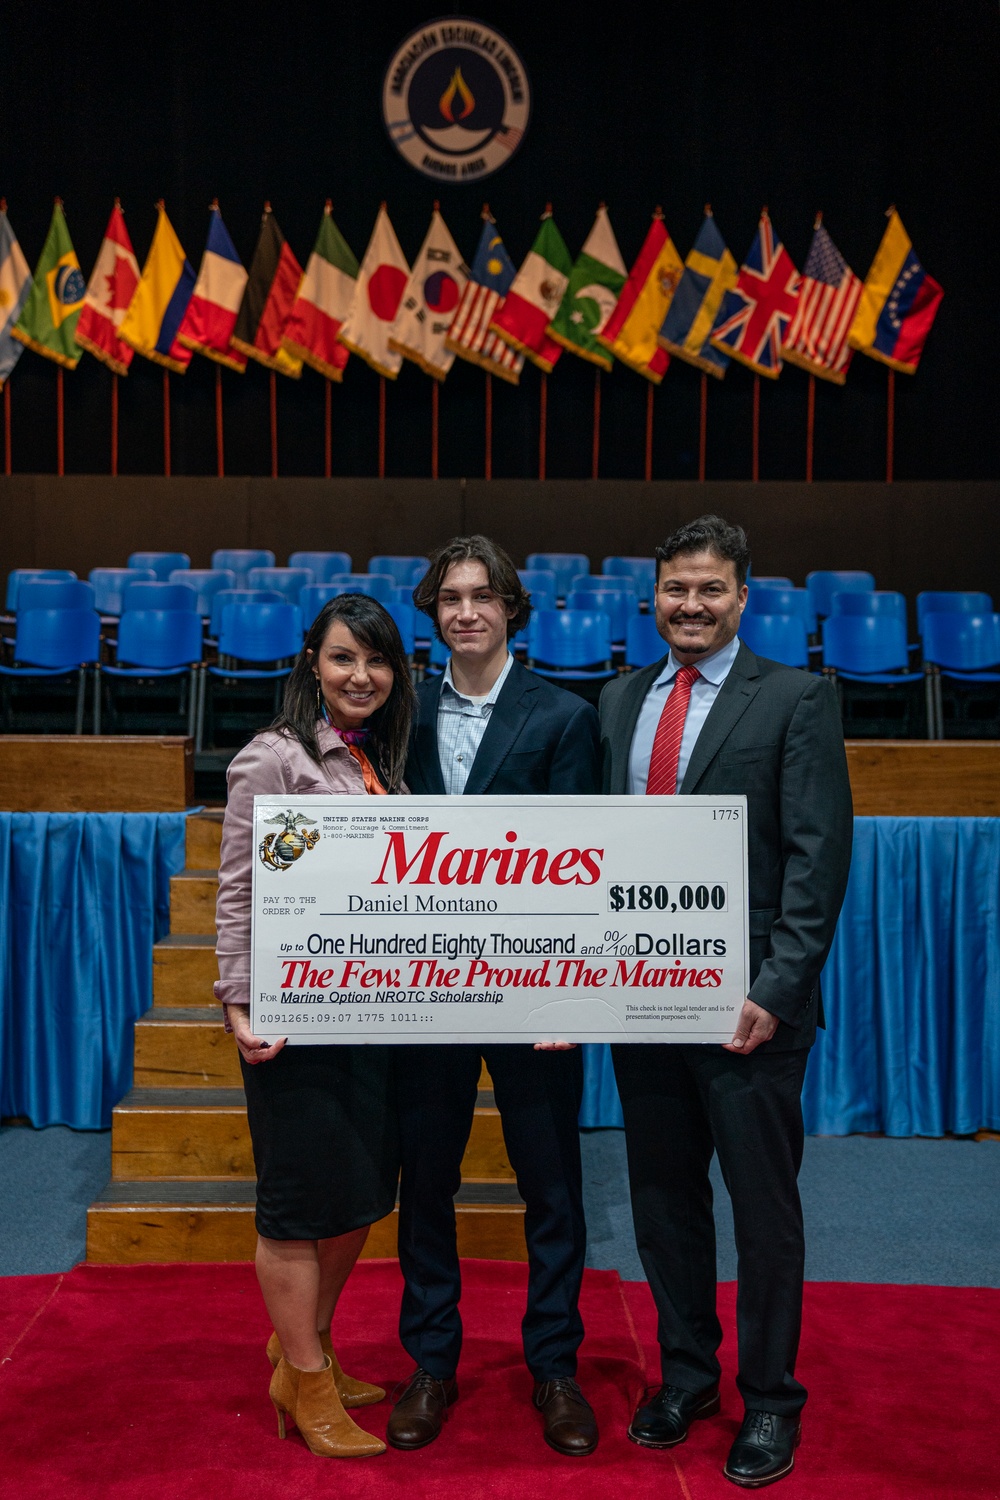 Foreign Service family’s son dreams of becoming a Marine, earns NROTC scholarship to Texas A&amp;M